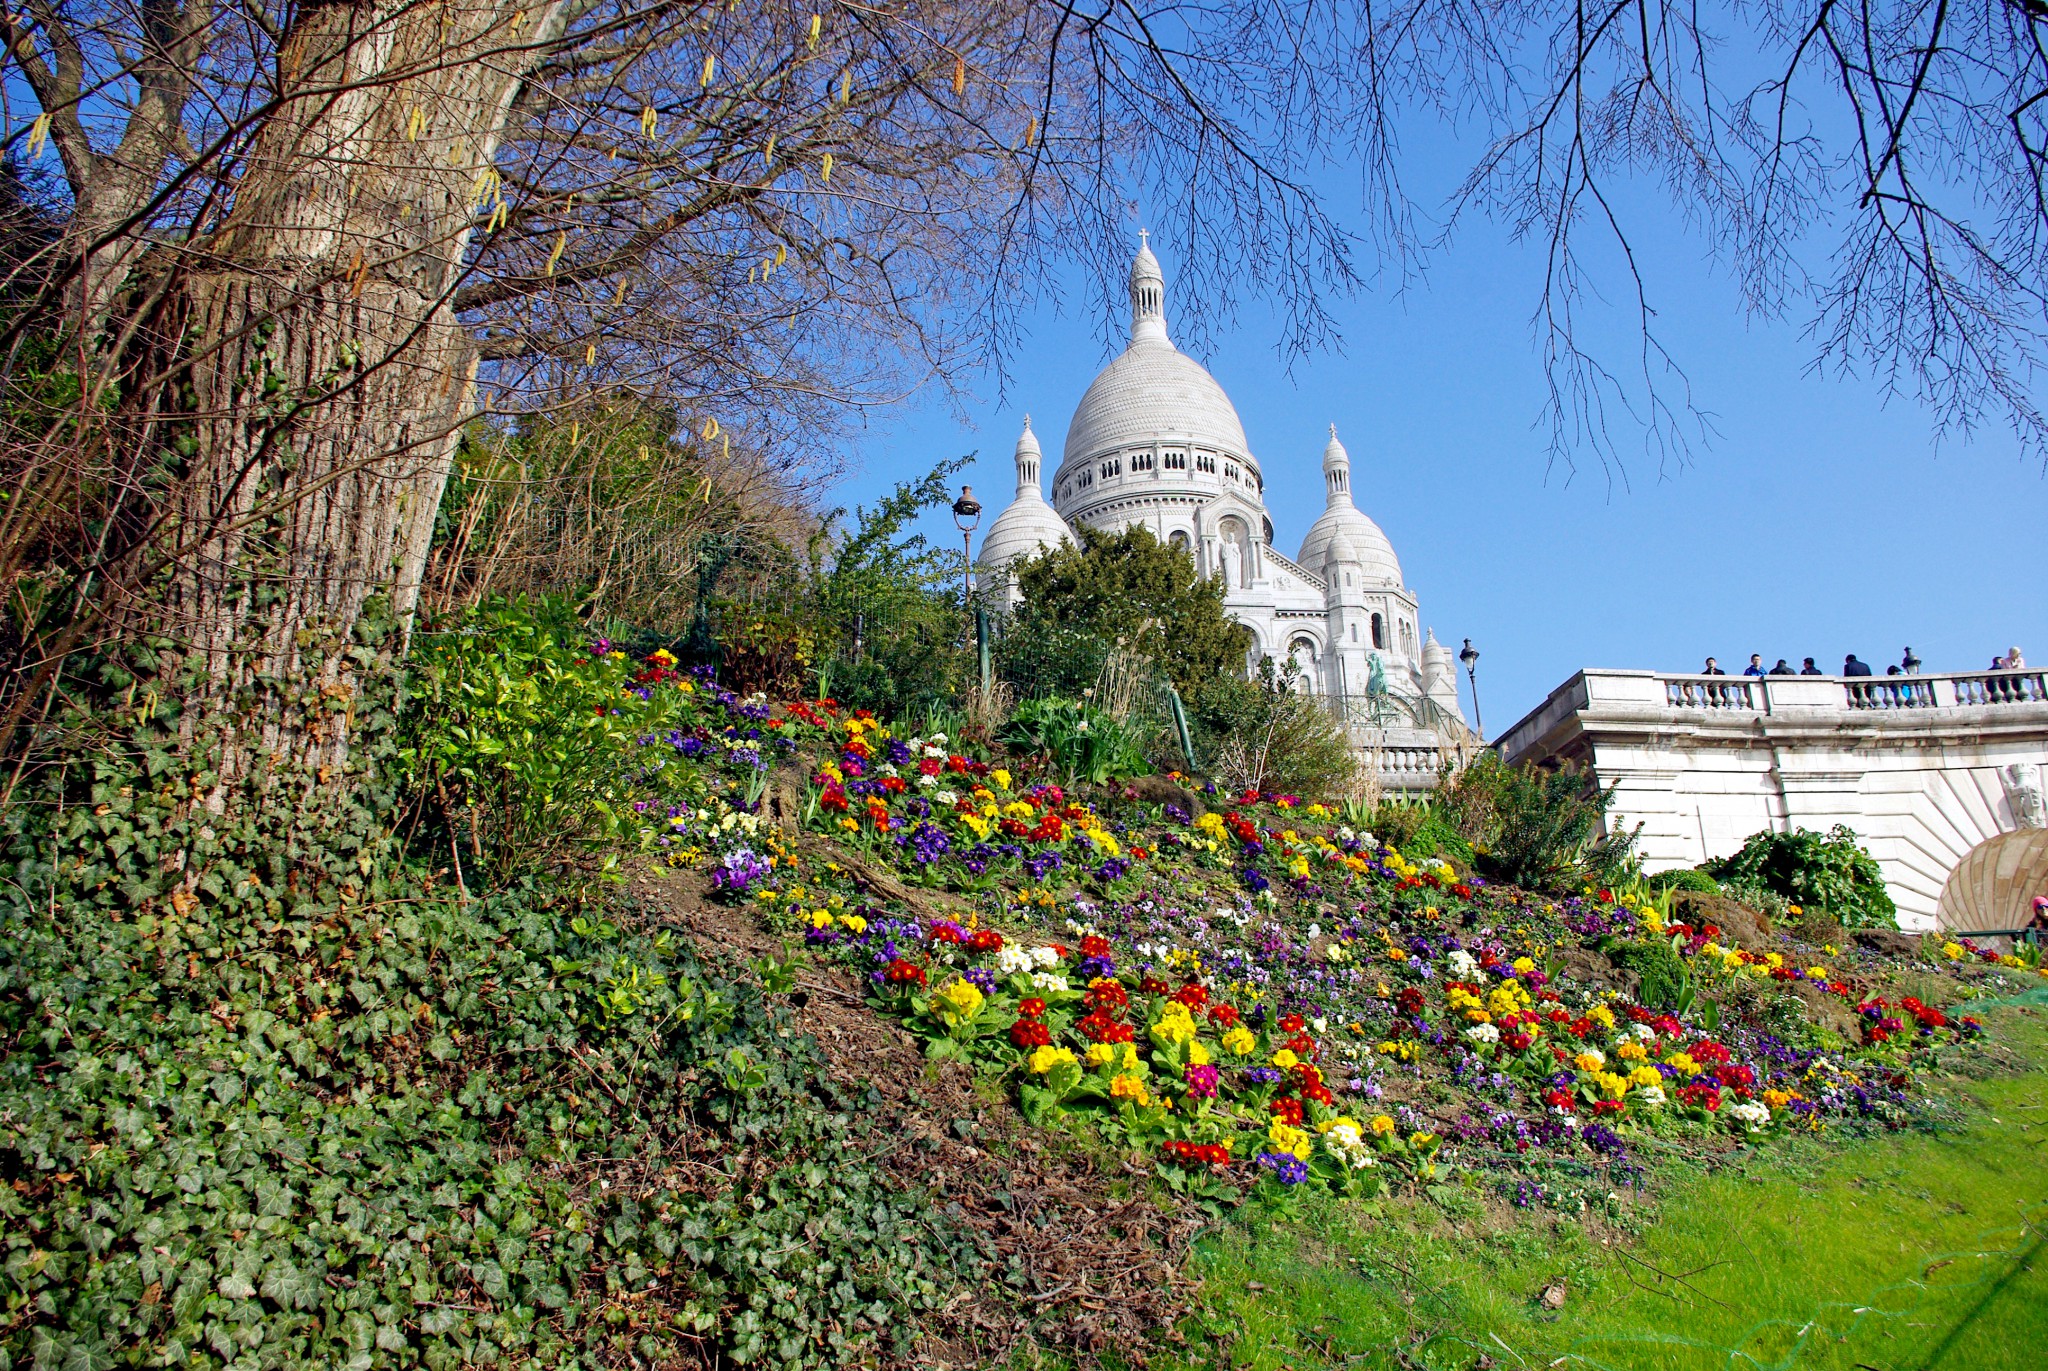 Square Louise Michel, Montmartre - French Moments